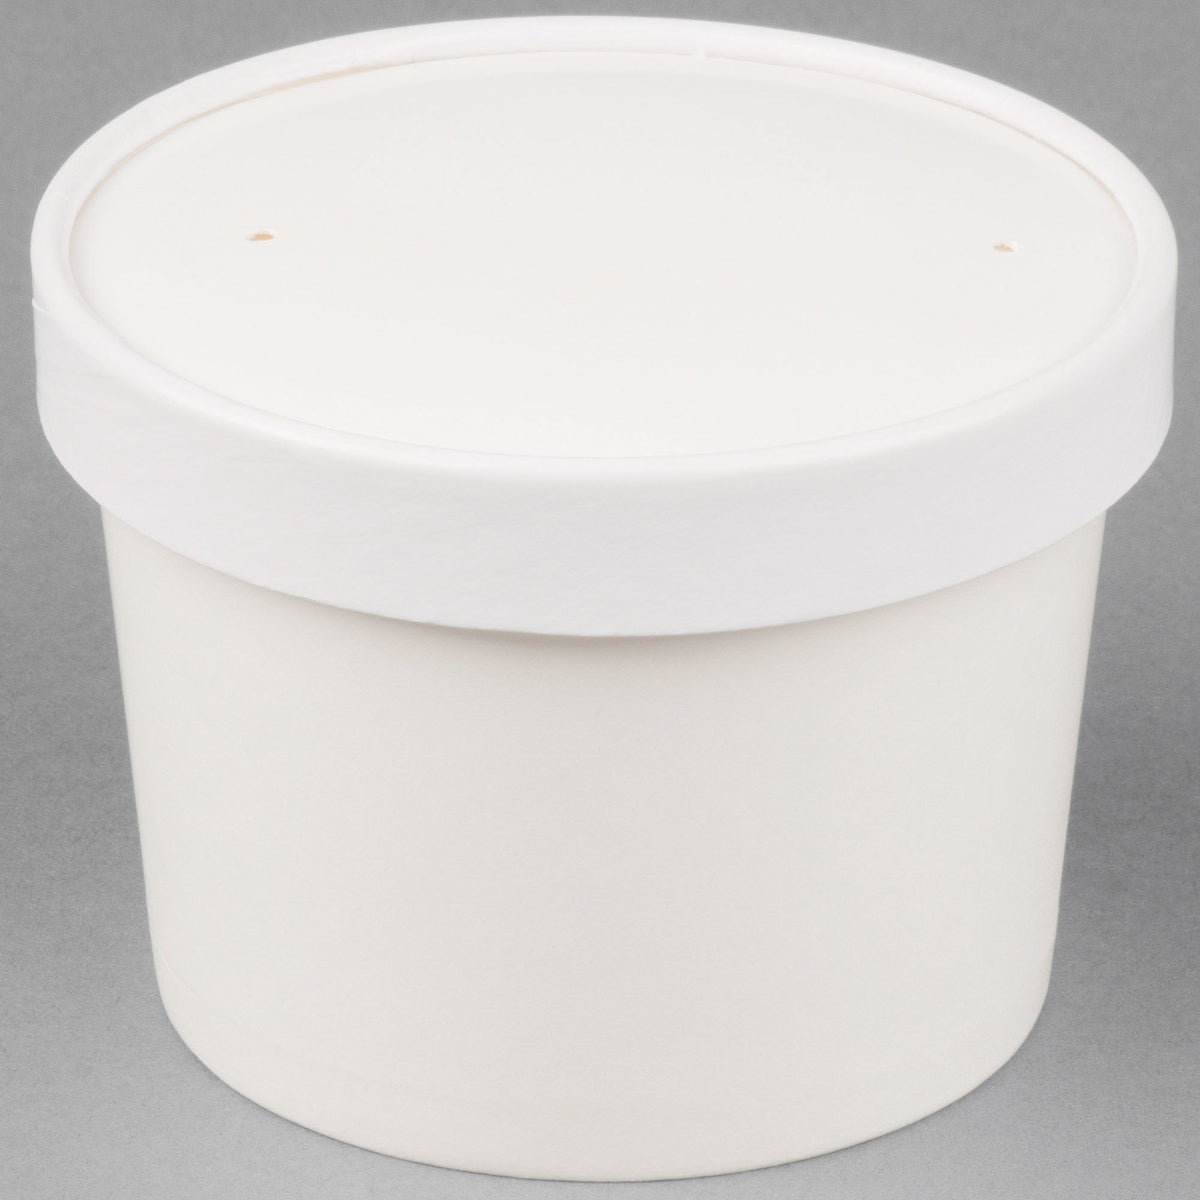 Kari-Out KA-2340012 Combo White Paper Soup Cup w/Vented Lid - 12